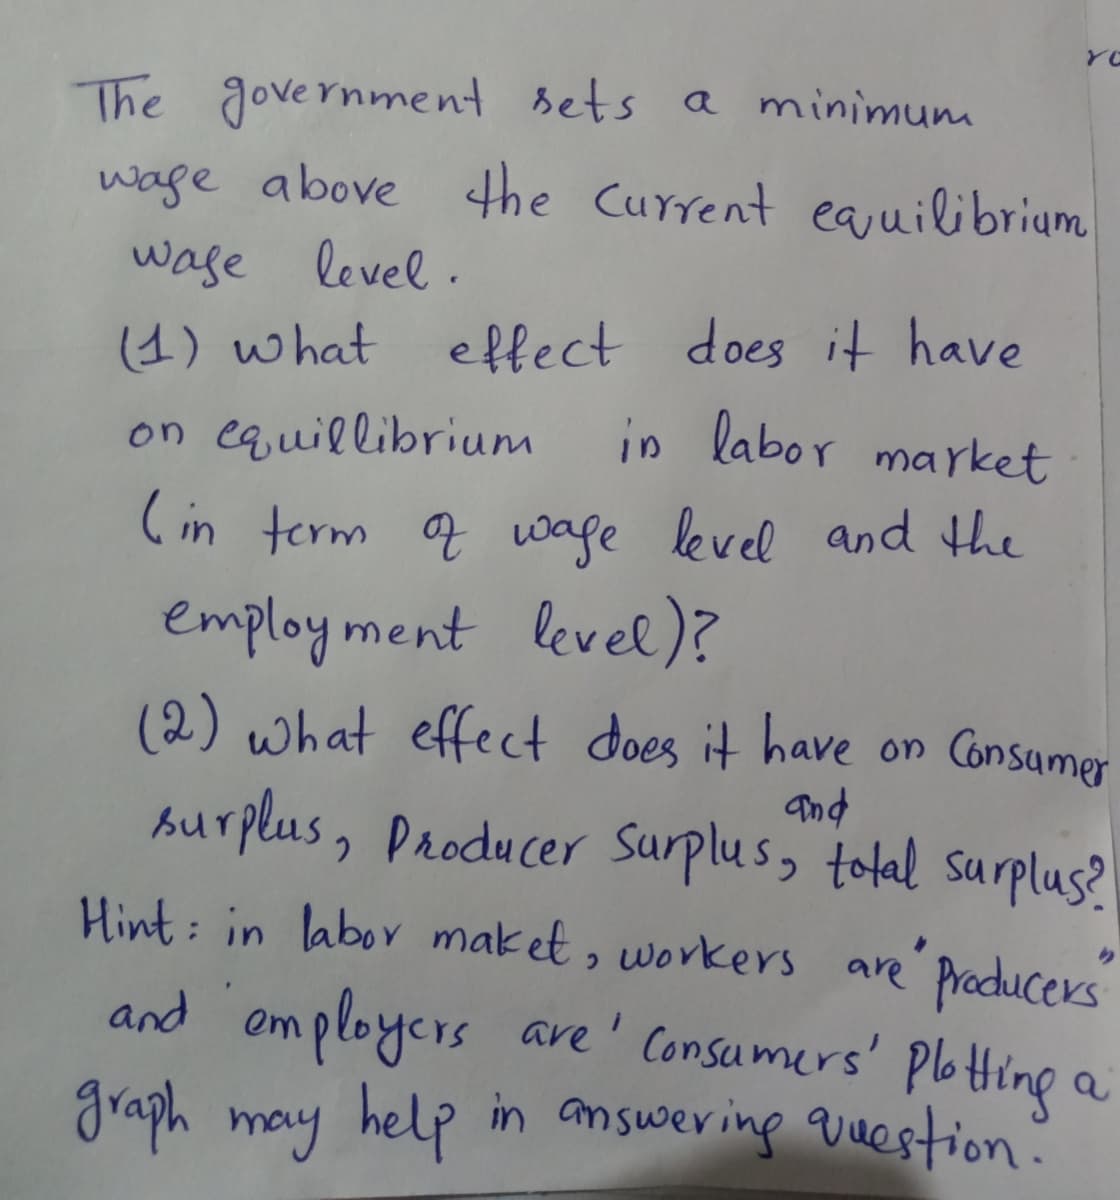 The government bets a minimum
wage above the Current eauilibrium
wase level.
effect does it have
in labor market
(4) what
on equillibrium
(in term a wage level and the
employ ment level)?
(2) what effect does it have on Consumer
burplus, Producer Surplus, tolal surplus?
and
Hint: in labor maket,
are Pracducers
and omployers are' Consumers' PlotHing a
graph may help in answering question?
